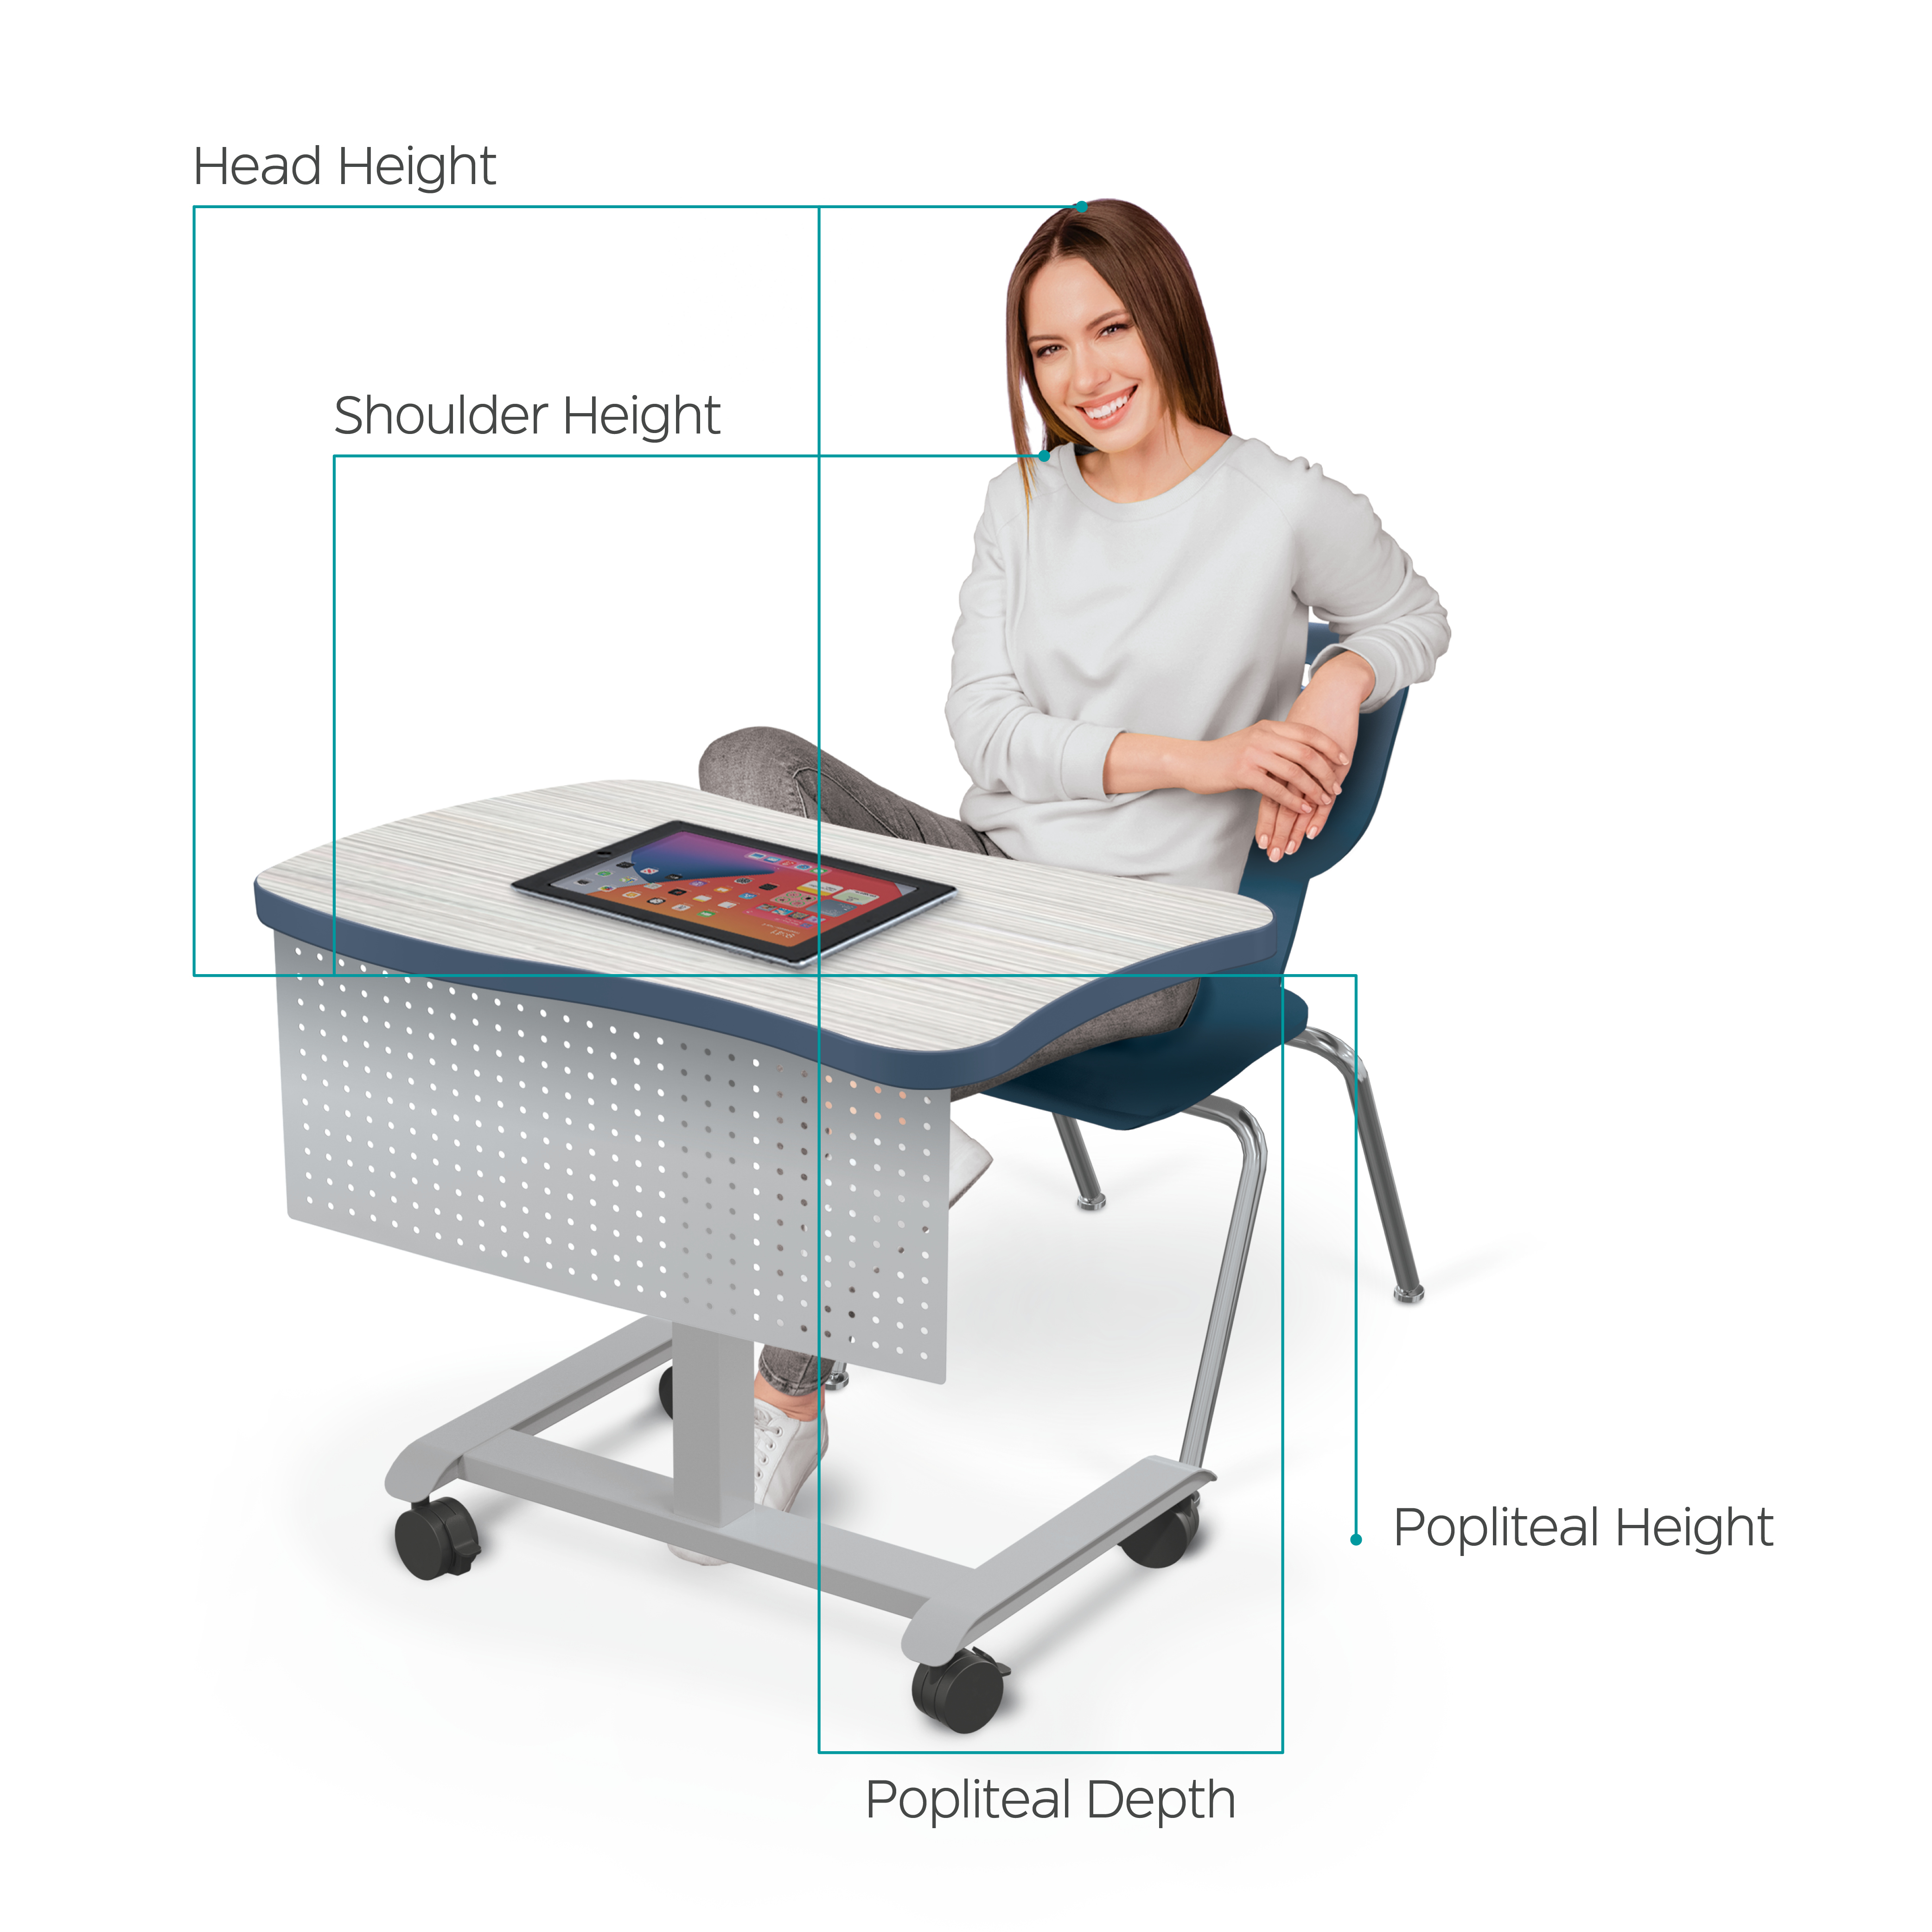 2023-09 Posture-Hierarchy-Grow-&-Roll-Desk-with-Hierarchy-4-Leg-Chair_v2